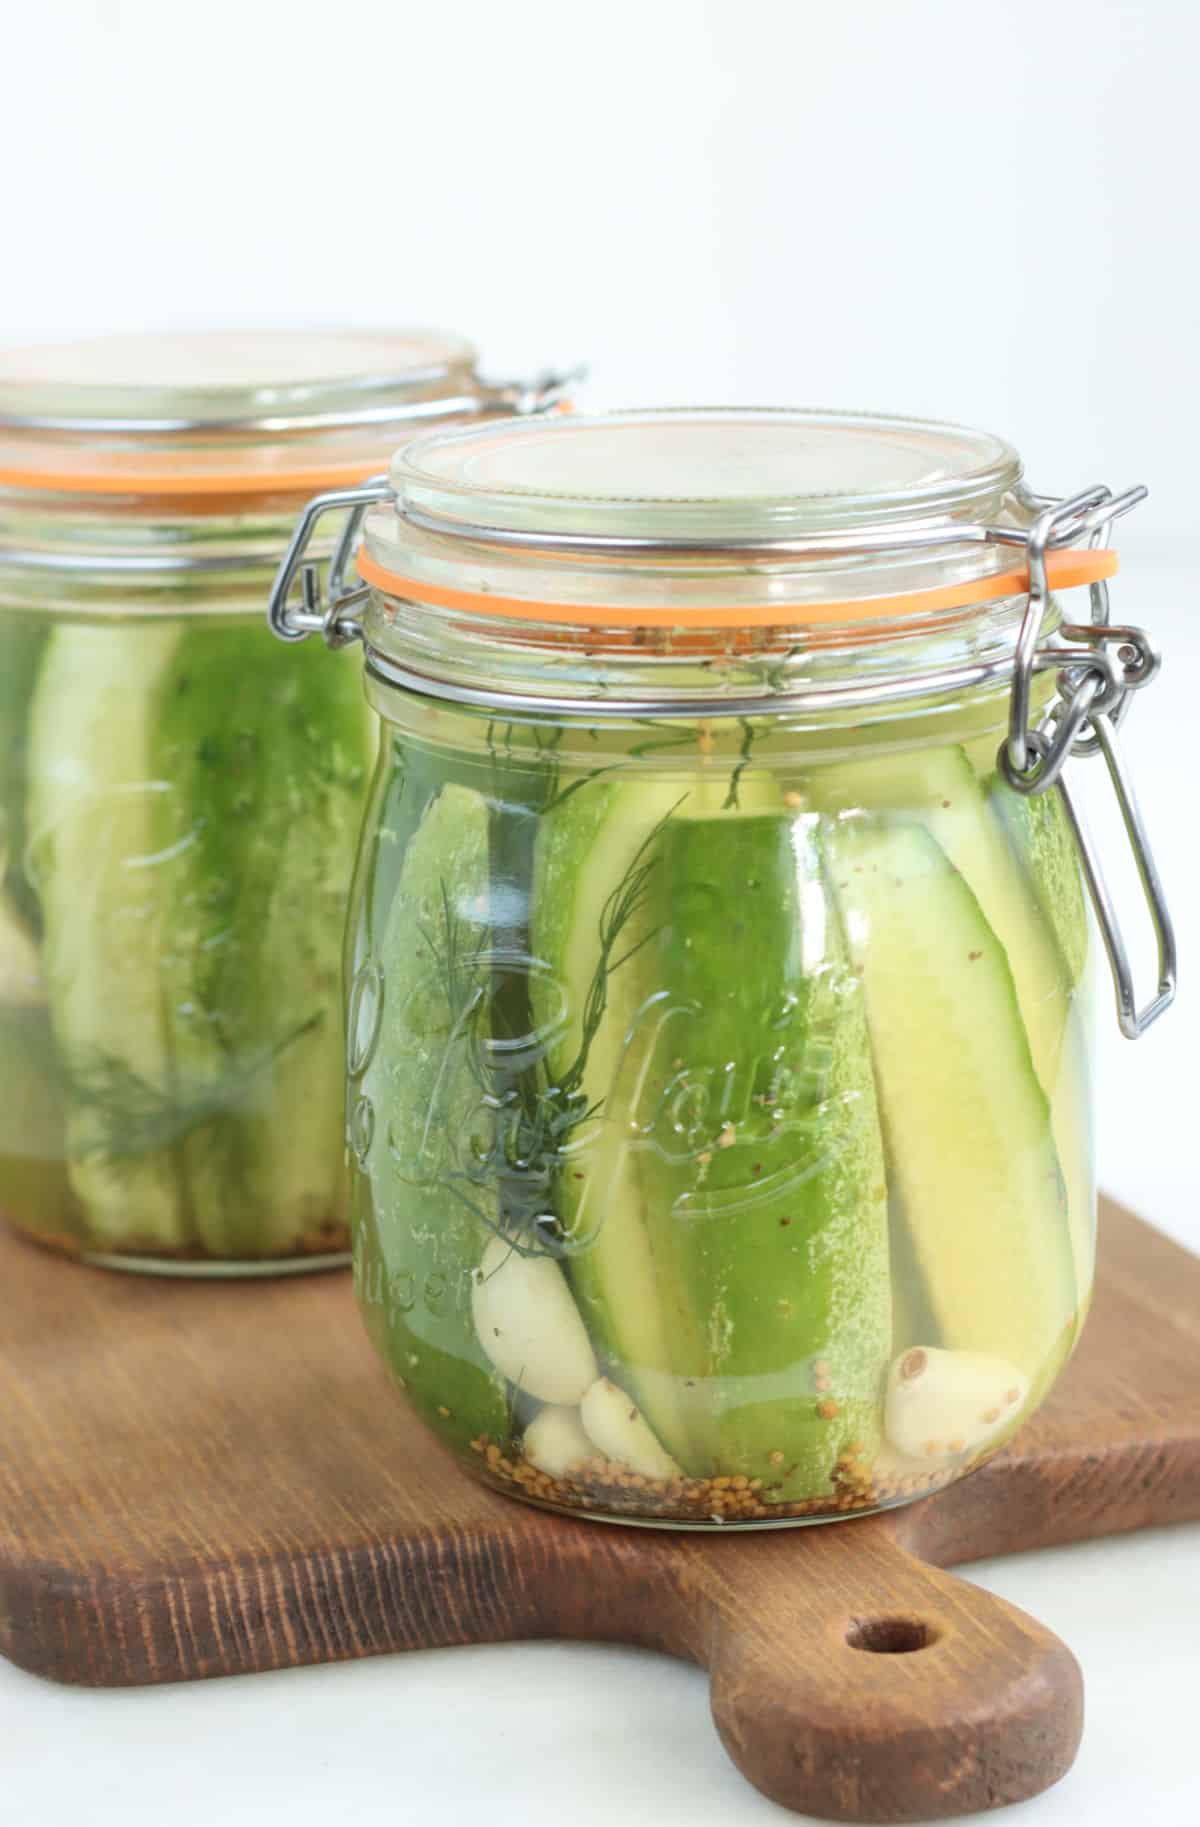 Glass jars with clasps and rubber seals with dill spears.